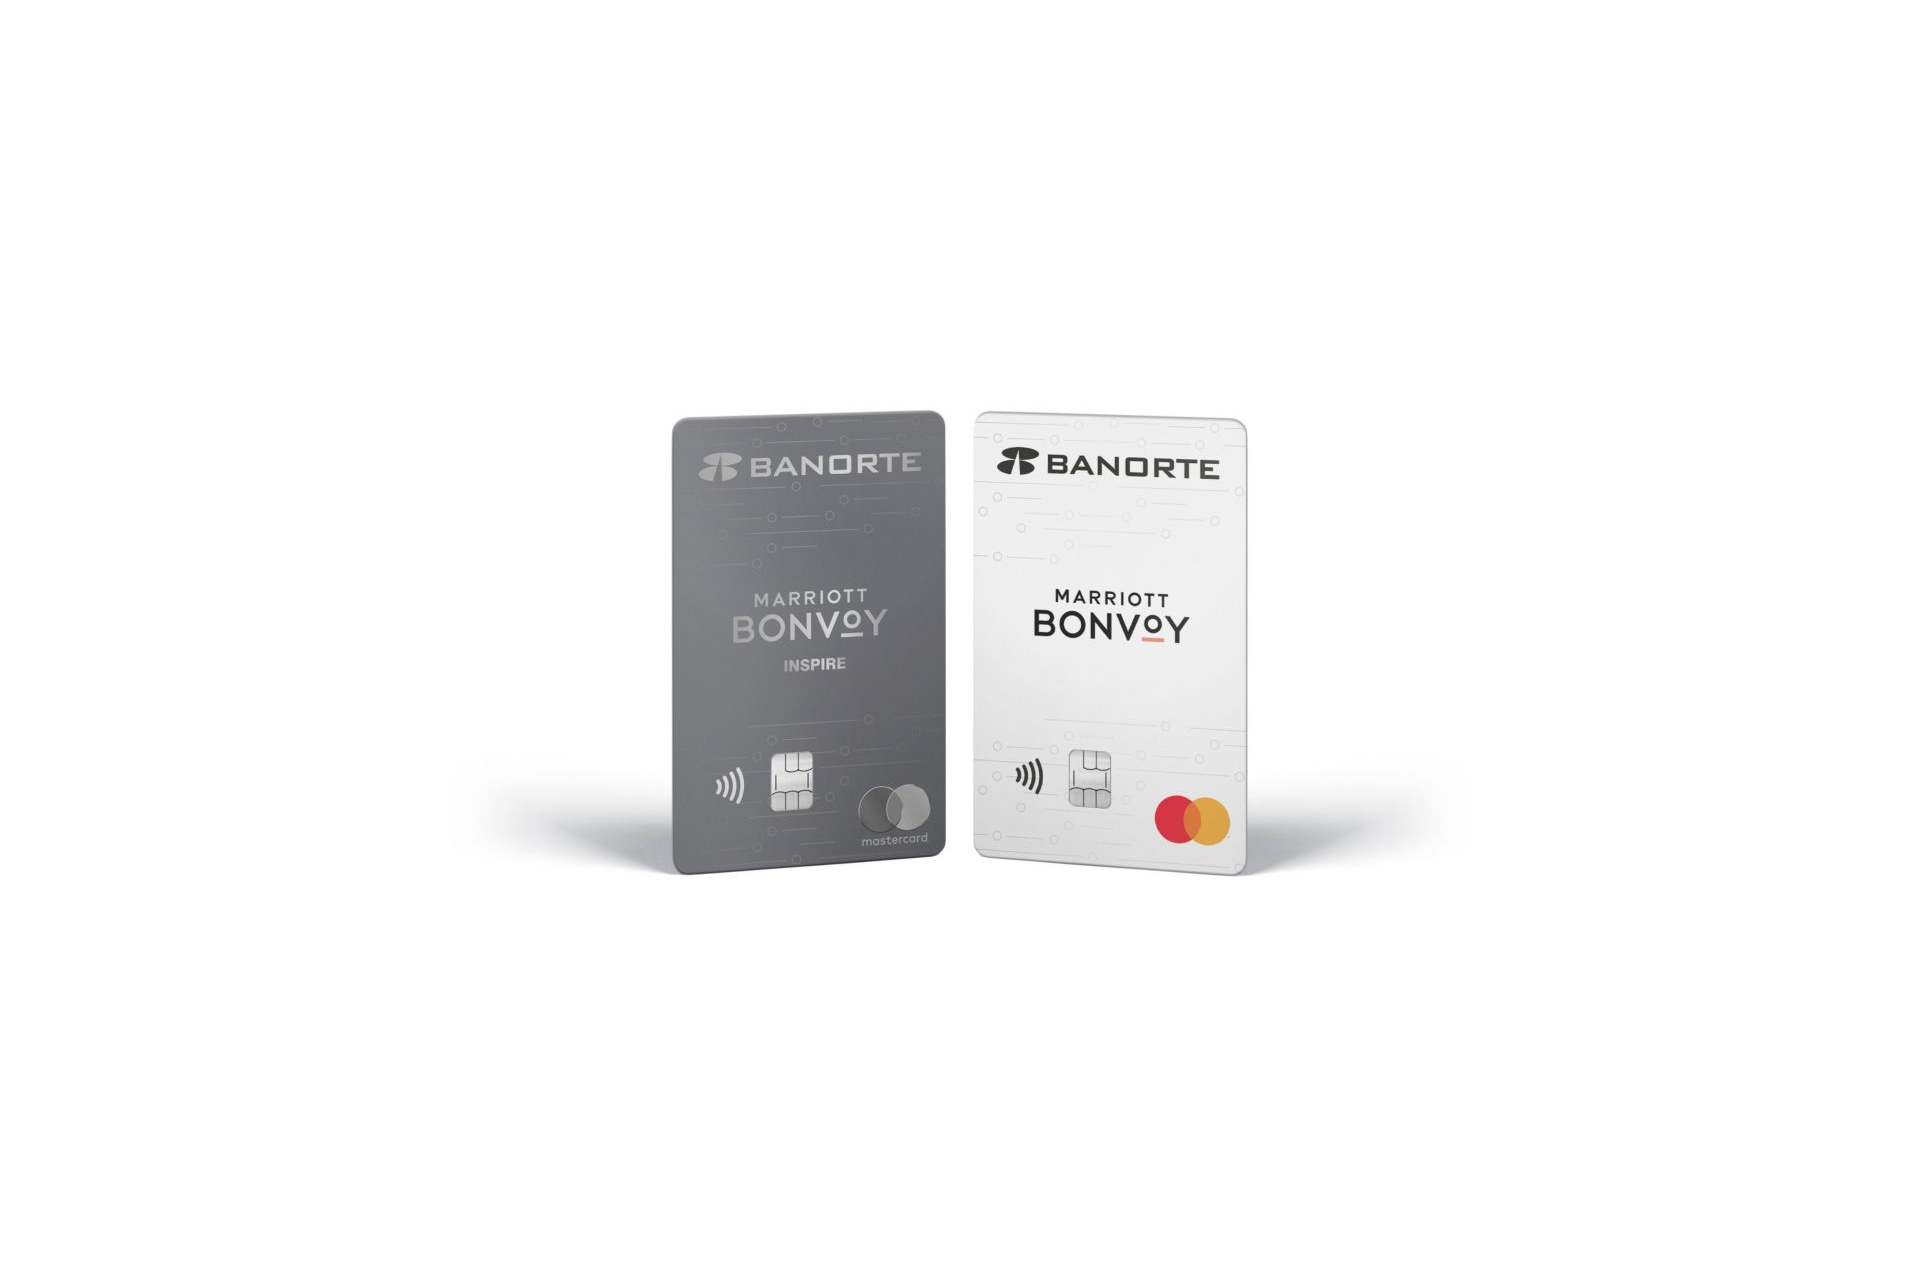 Banorte launches new Marriott Bonvoy credit cards in Mexico